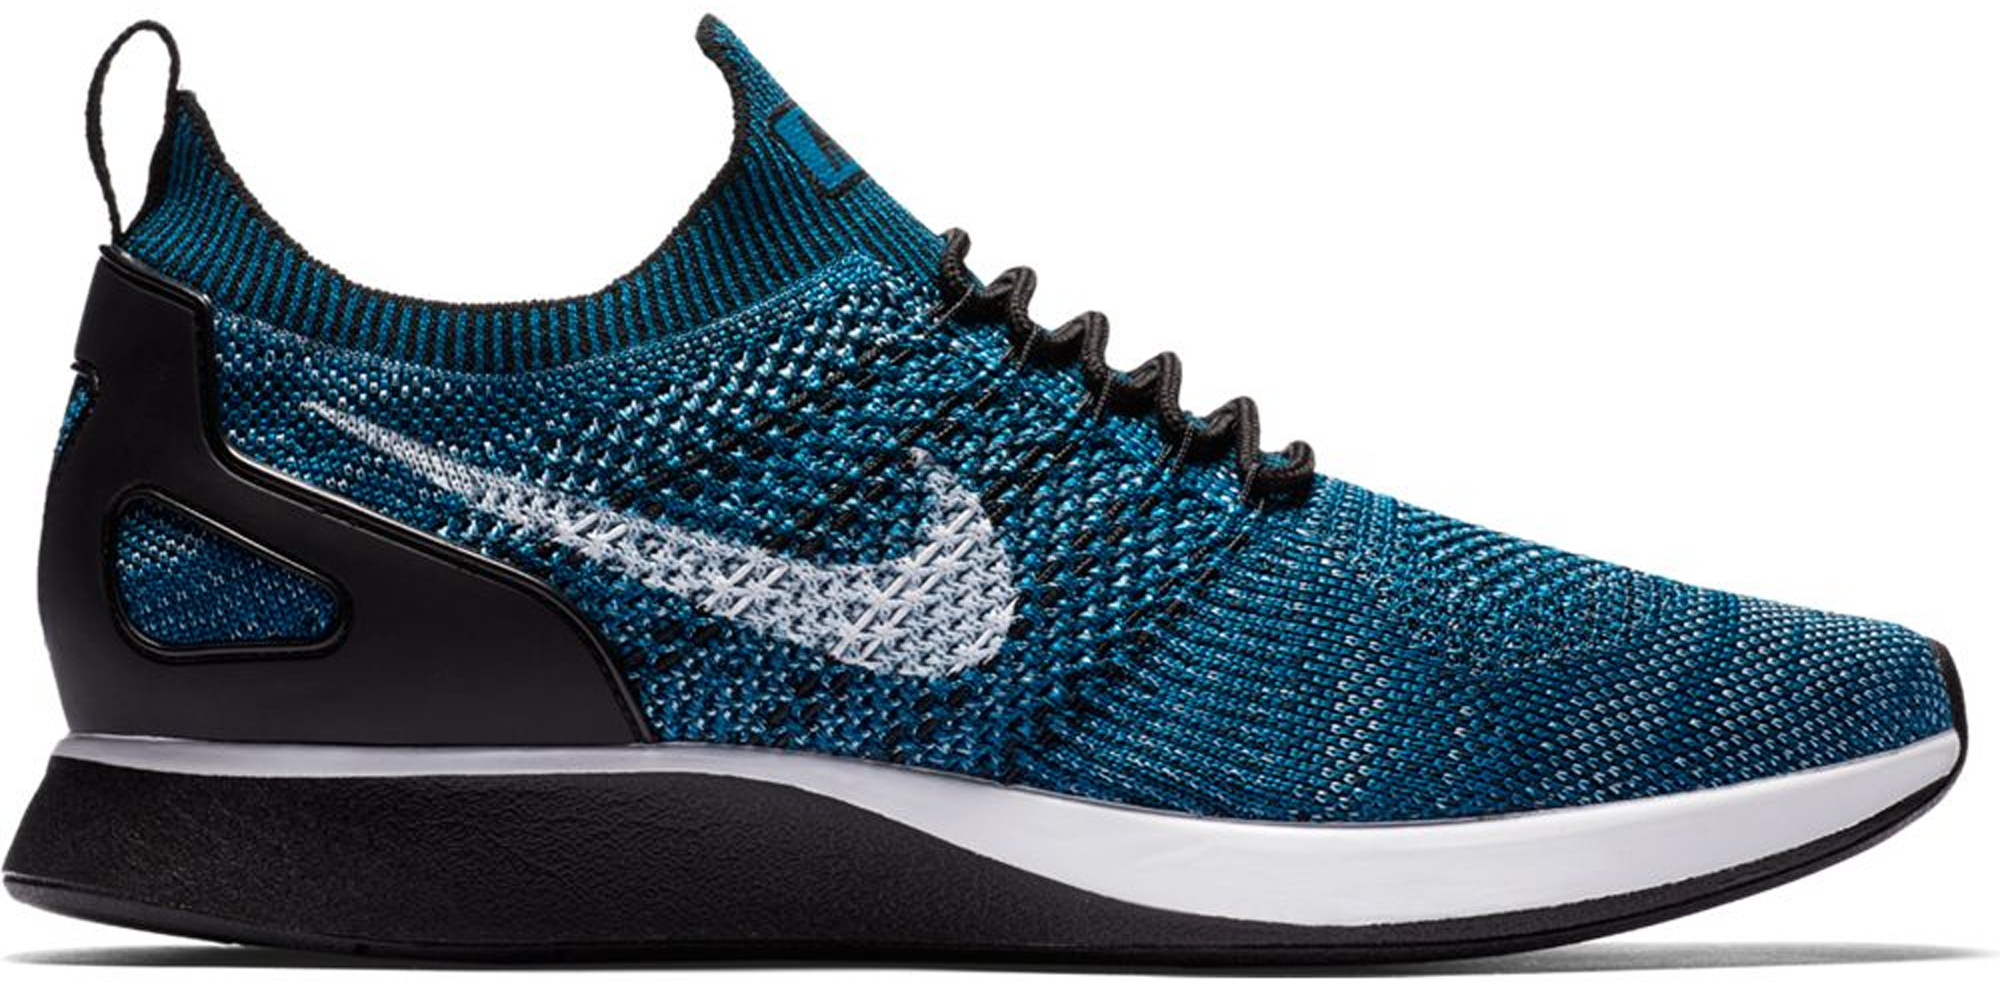 Nike Air Zoom Mariah Flyknit Racer Green Abyss Cirrus Blue - 918264-300